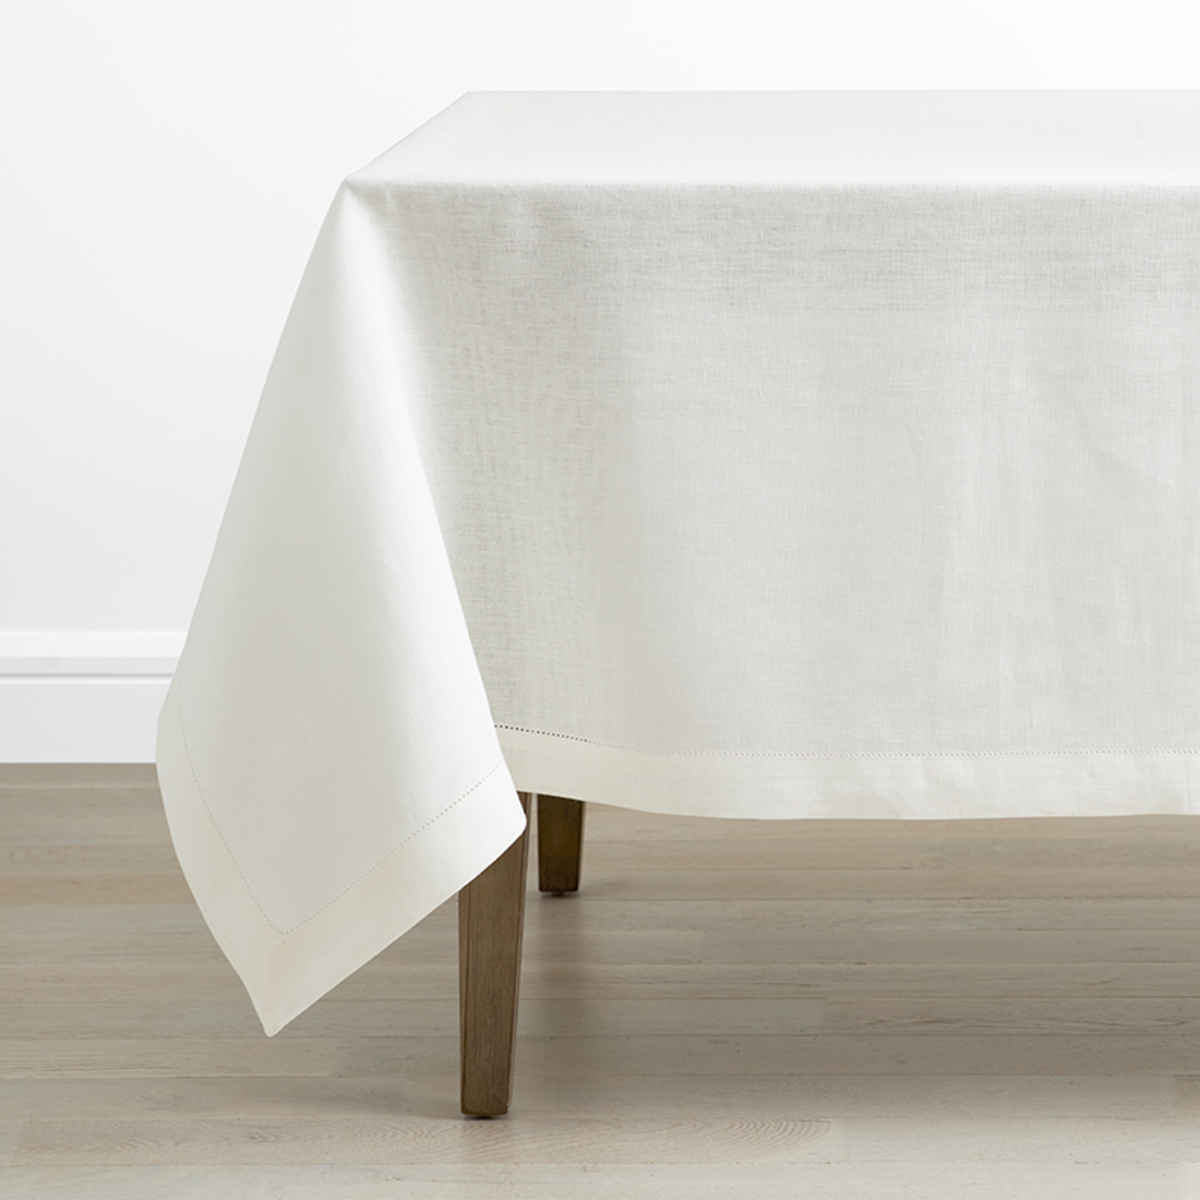 https://companystore-res.cloudinary.com/image/upload/f_auto,q_40,dpr_3.0/w_400,c_scale/webimages/80018a_tablecloth_offwhite_main?_s=RAABAB0